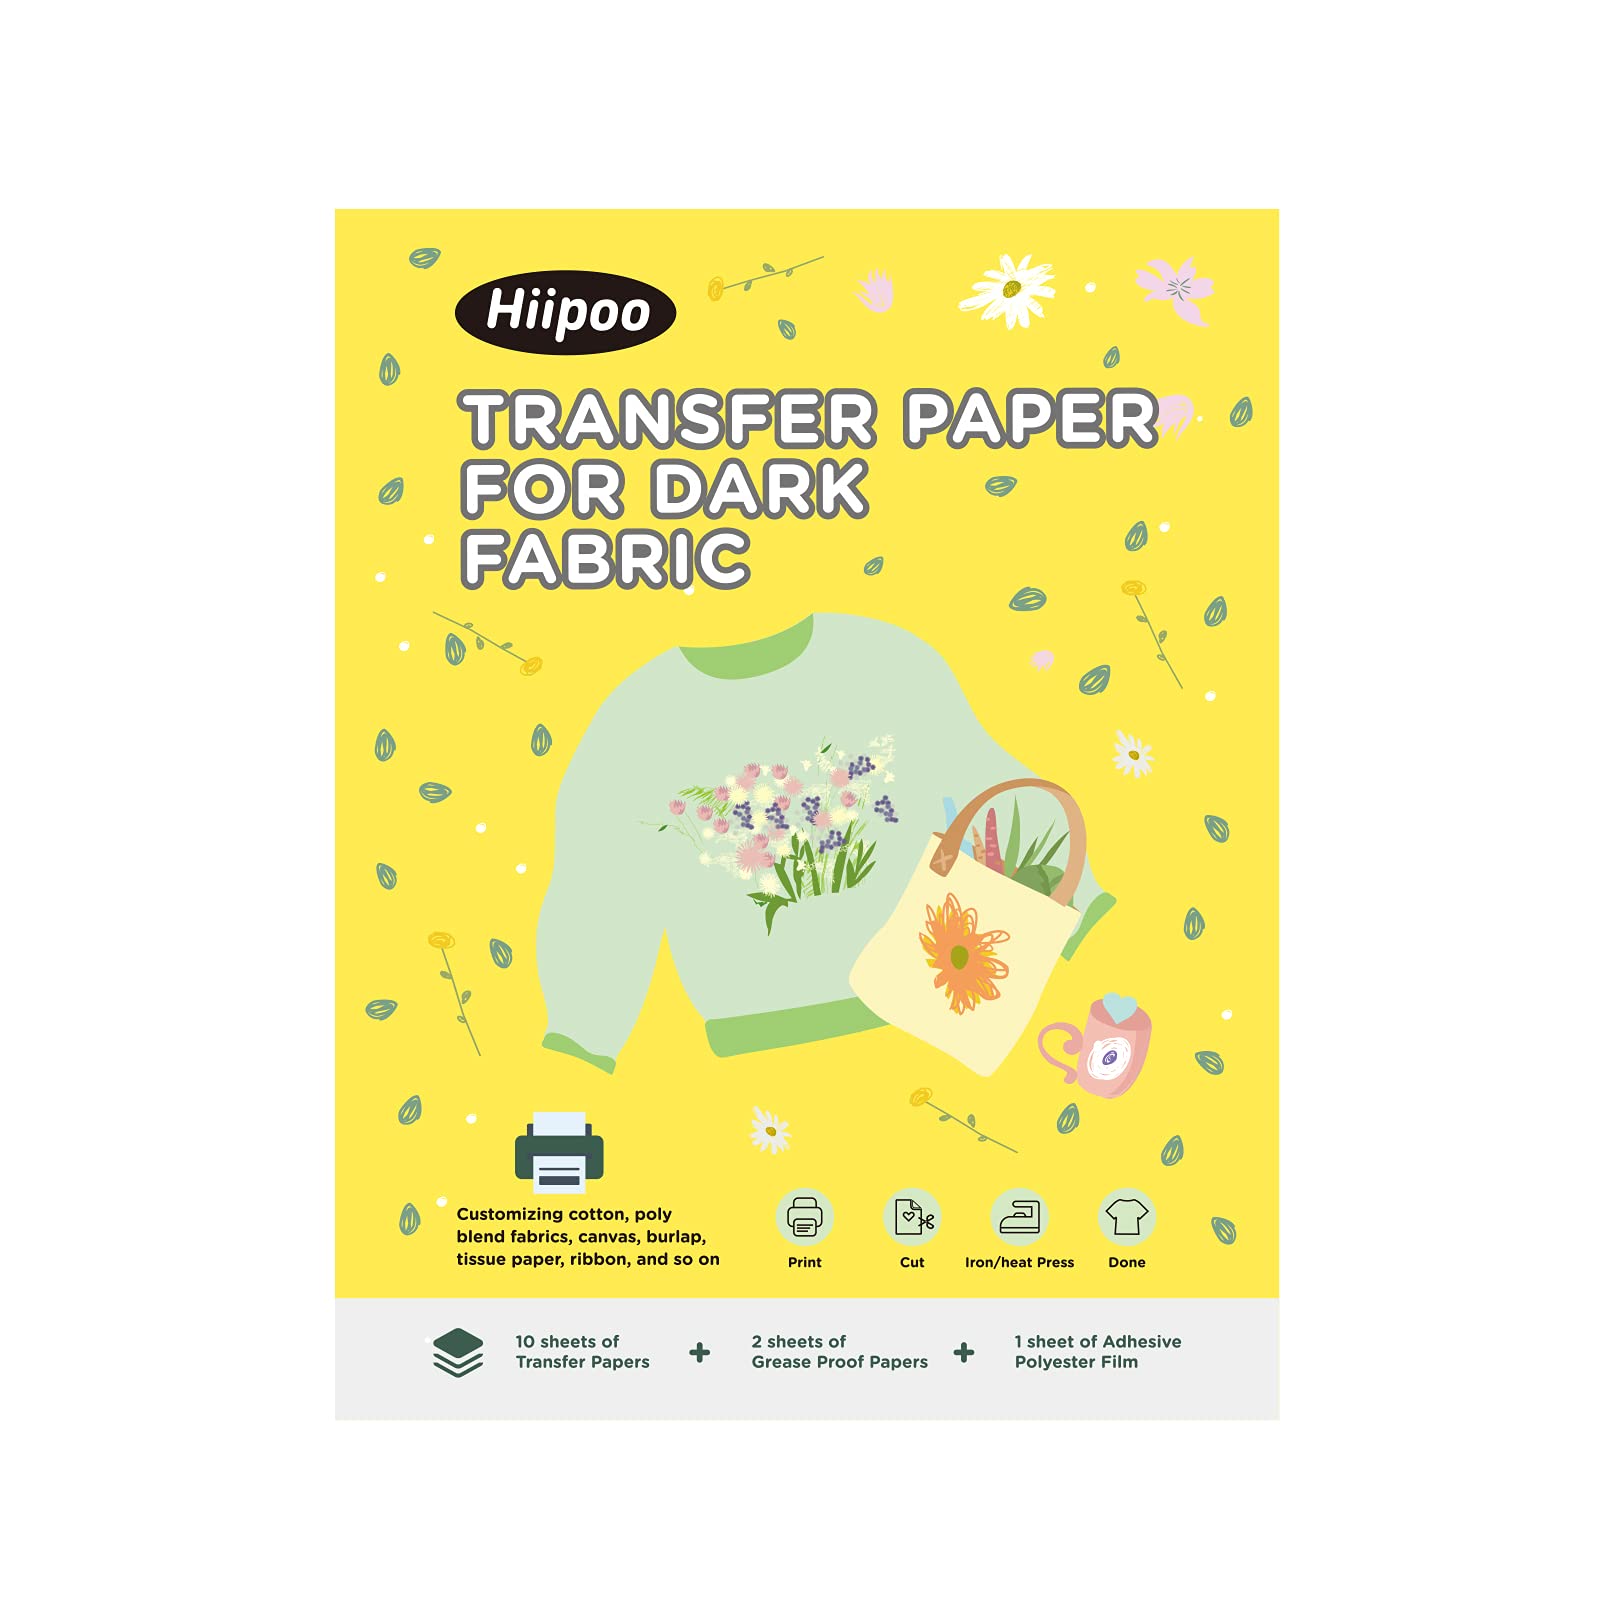 Hiipoo Heat Transfer Paper 8.5x11 Iron-on Transfer Paper for T-Shirt 10  Sheets Printable and Washable Dark Transfer Paper for Inkjet Printer A- 8.5x11